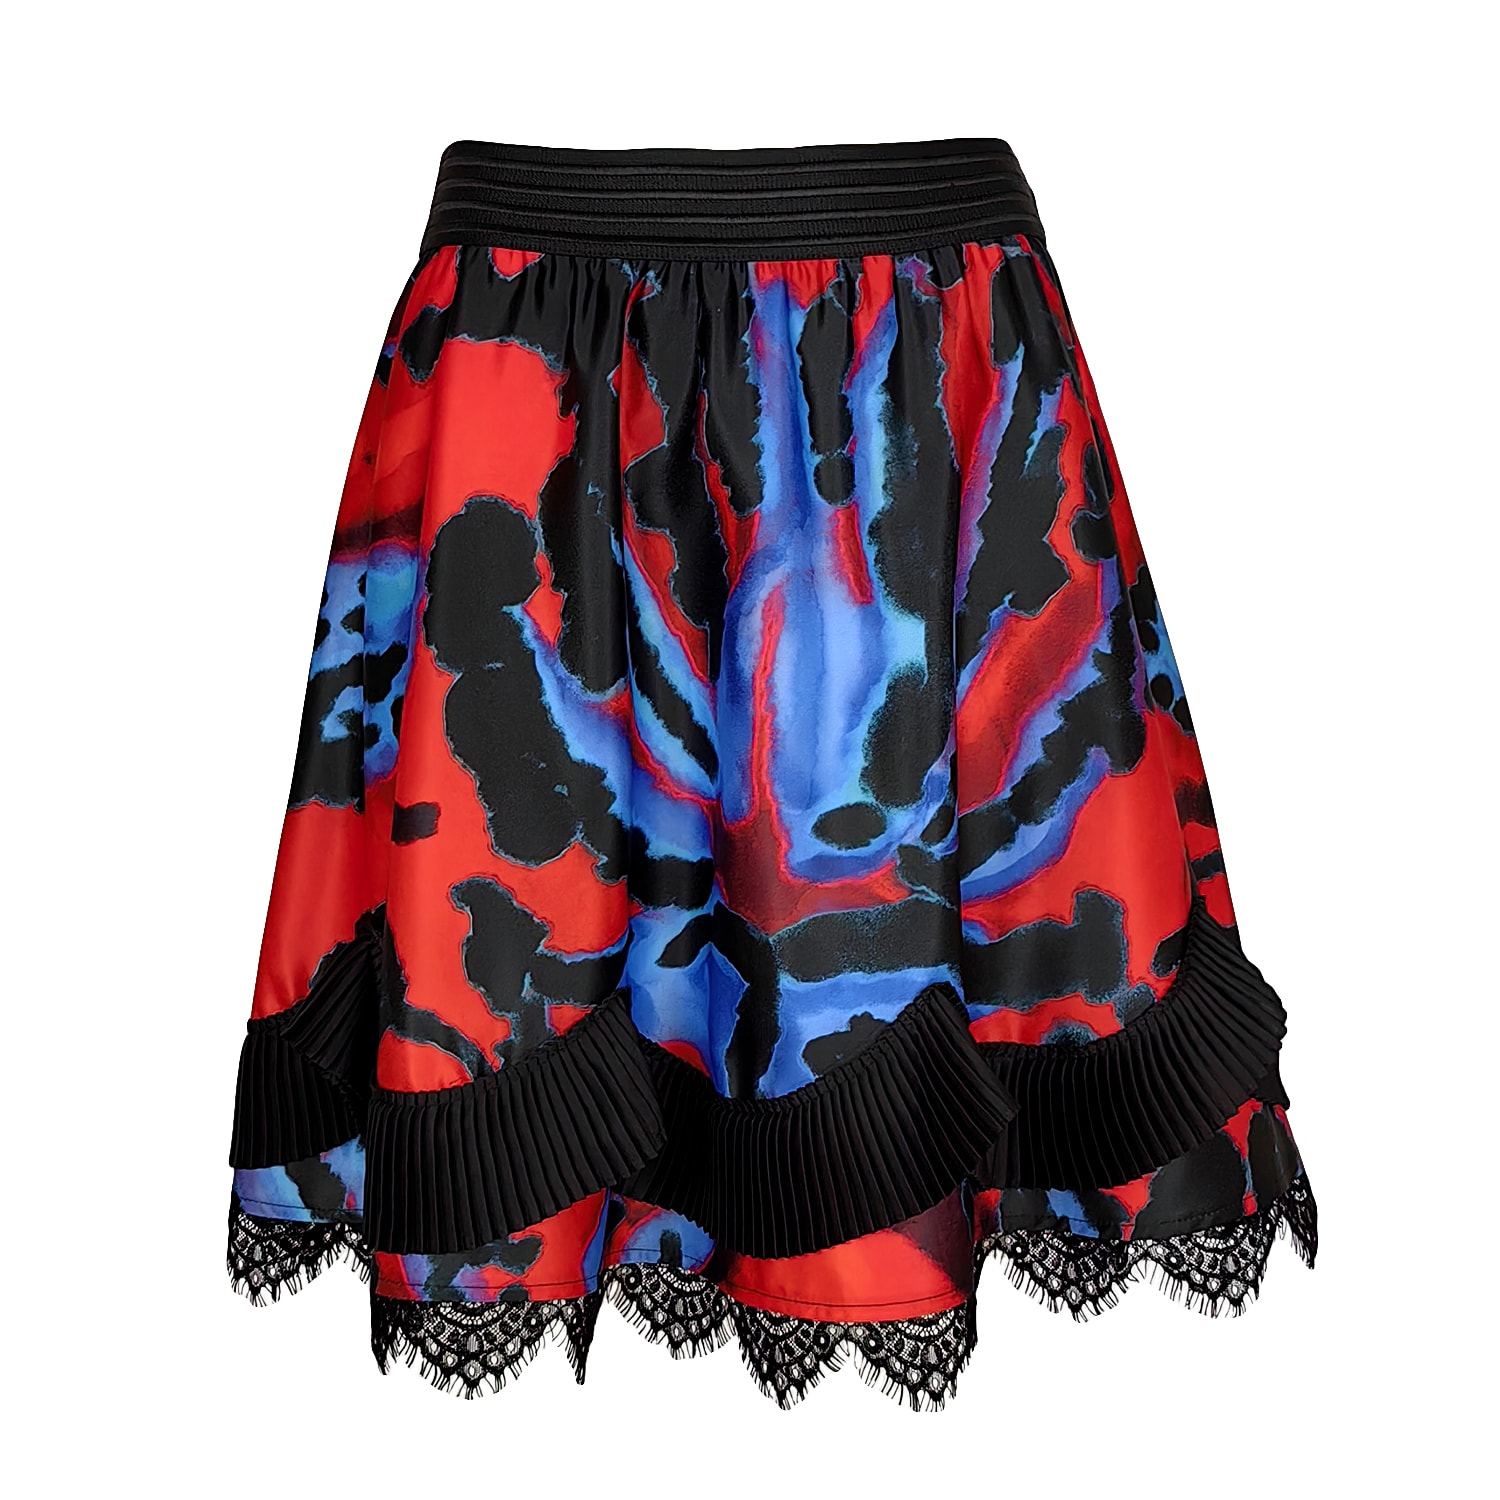 Women’s Flared Circle Skirt With Pleated Chiffon & Lace Trim Details Extra Small Lalipop Design